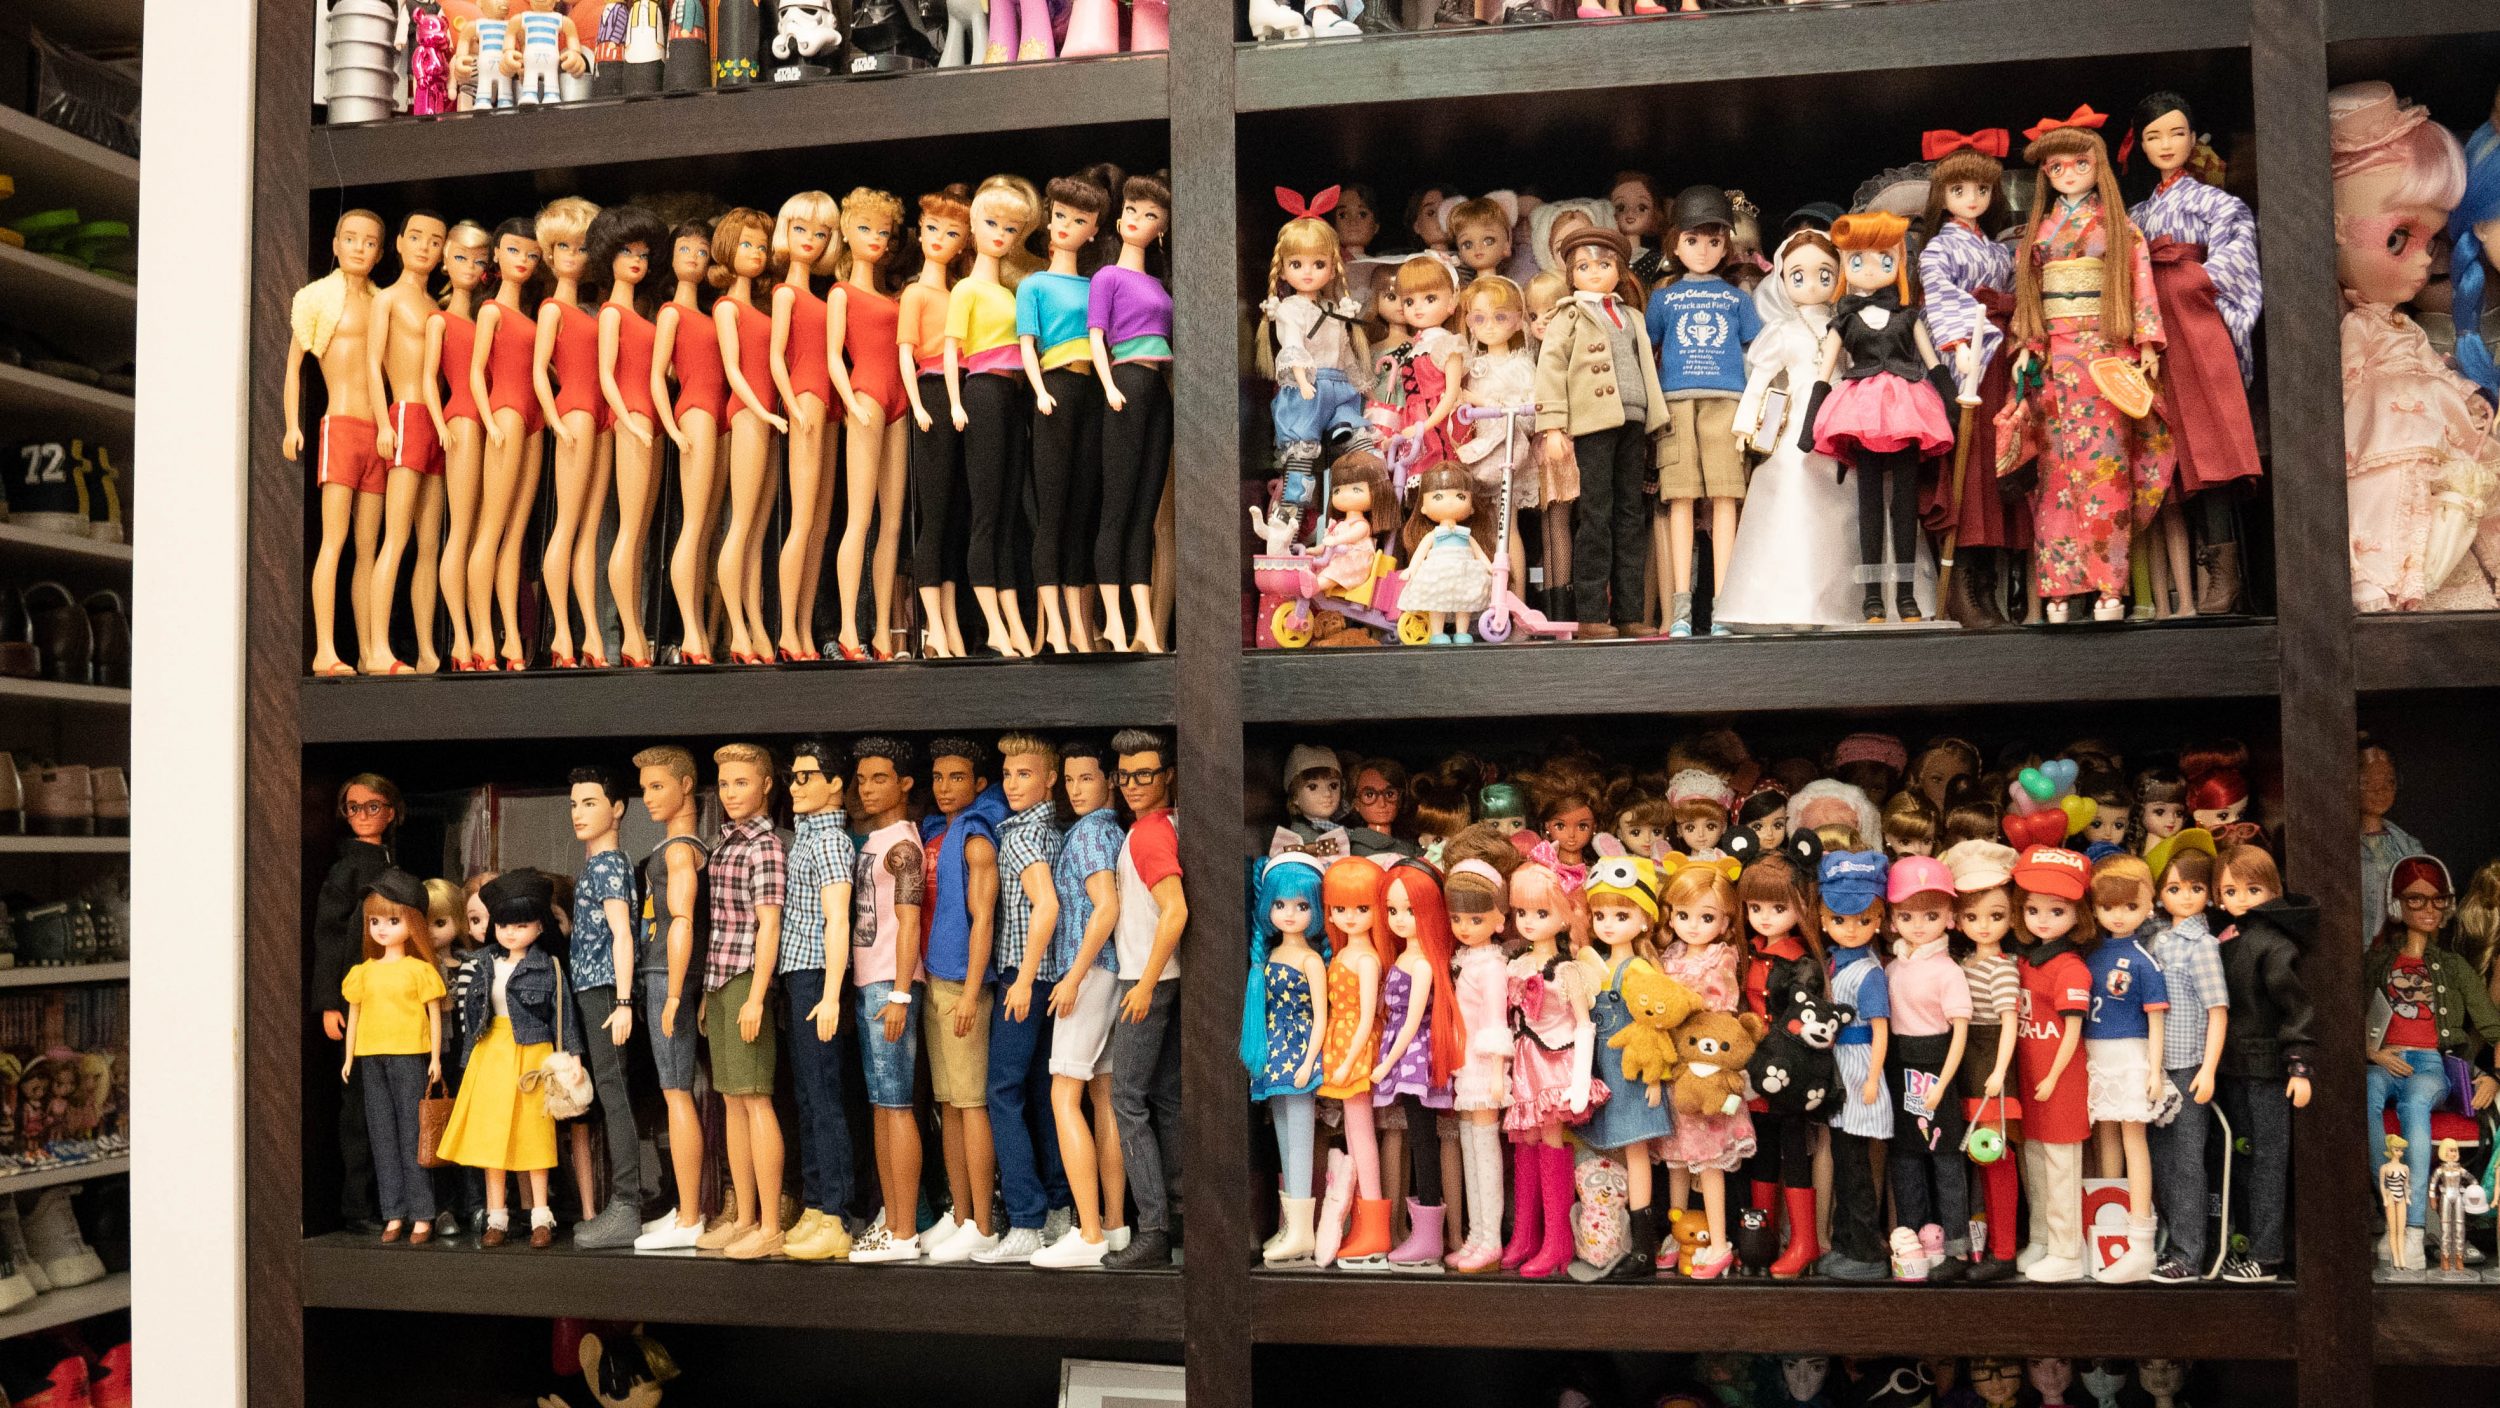 The Worlds 2nd Largest Collection Of Barbie Dolls Belongs To This Foul